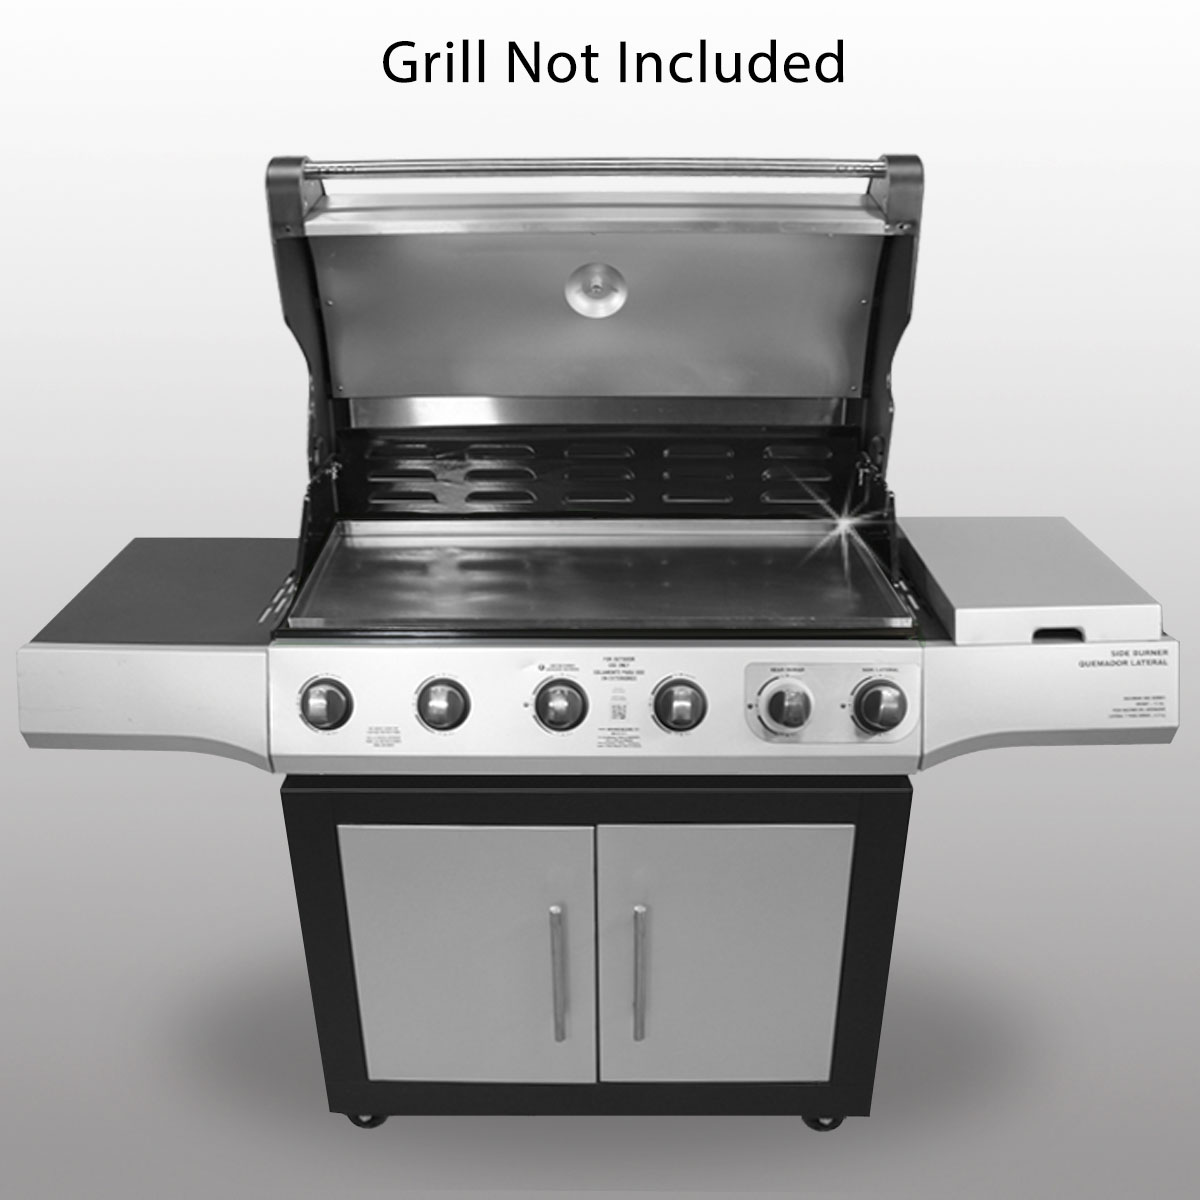 Stove Top Griddle, 23 X 16 Griddle for Gas Grill, Stainless Steel Flat Top  Gri